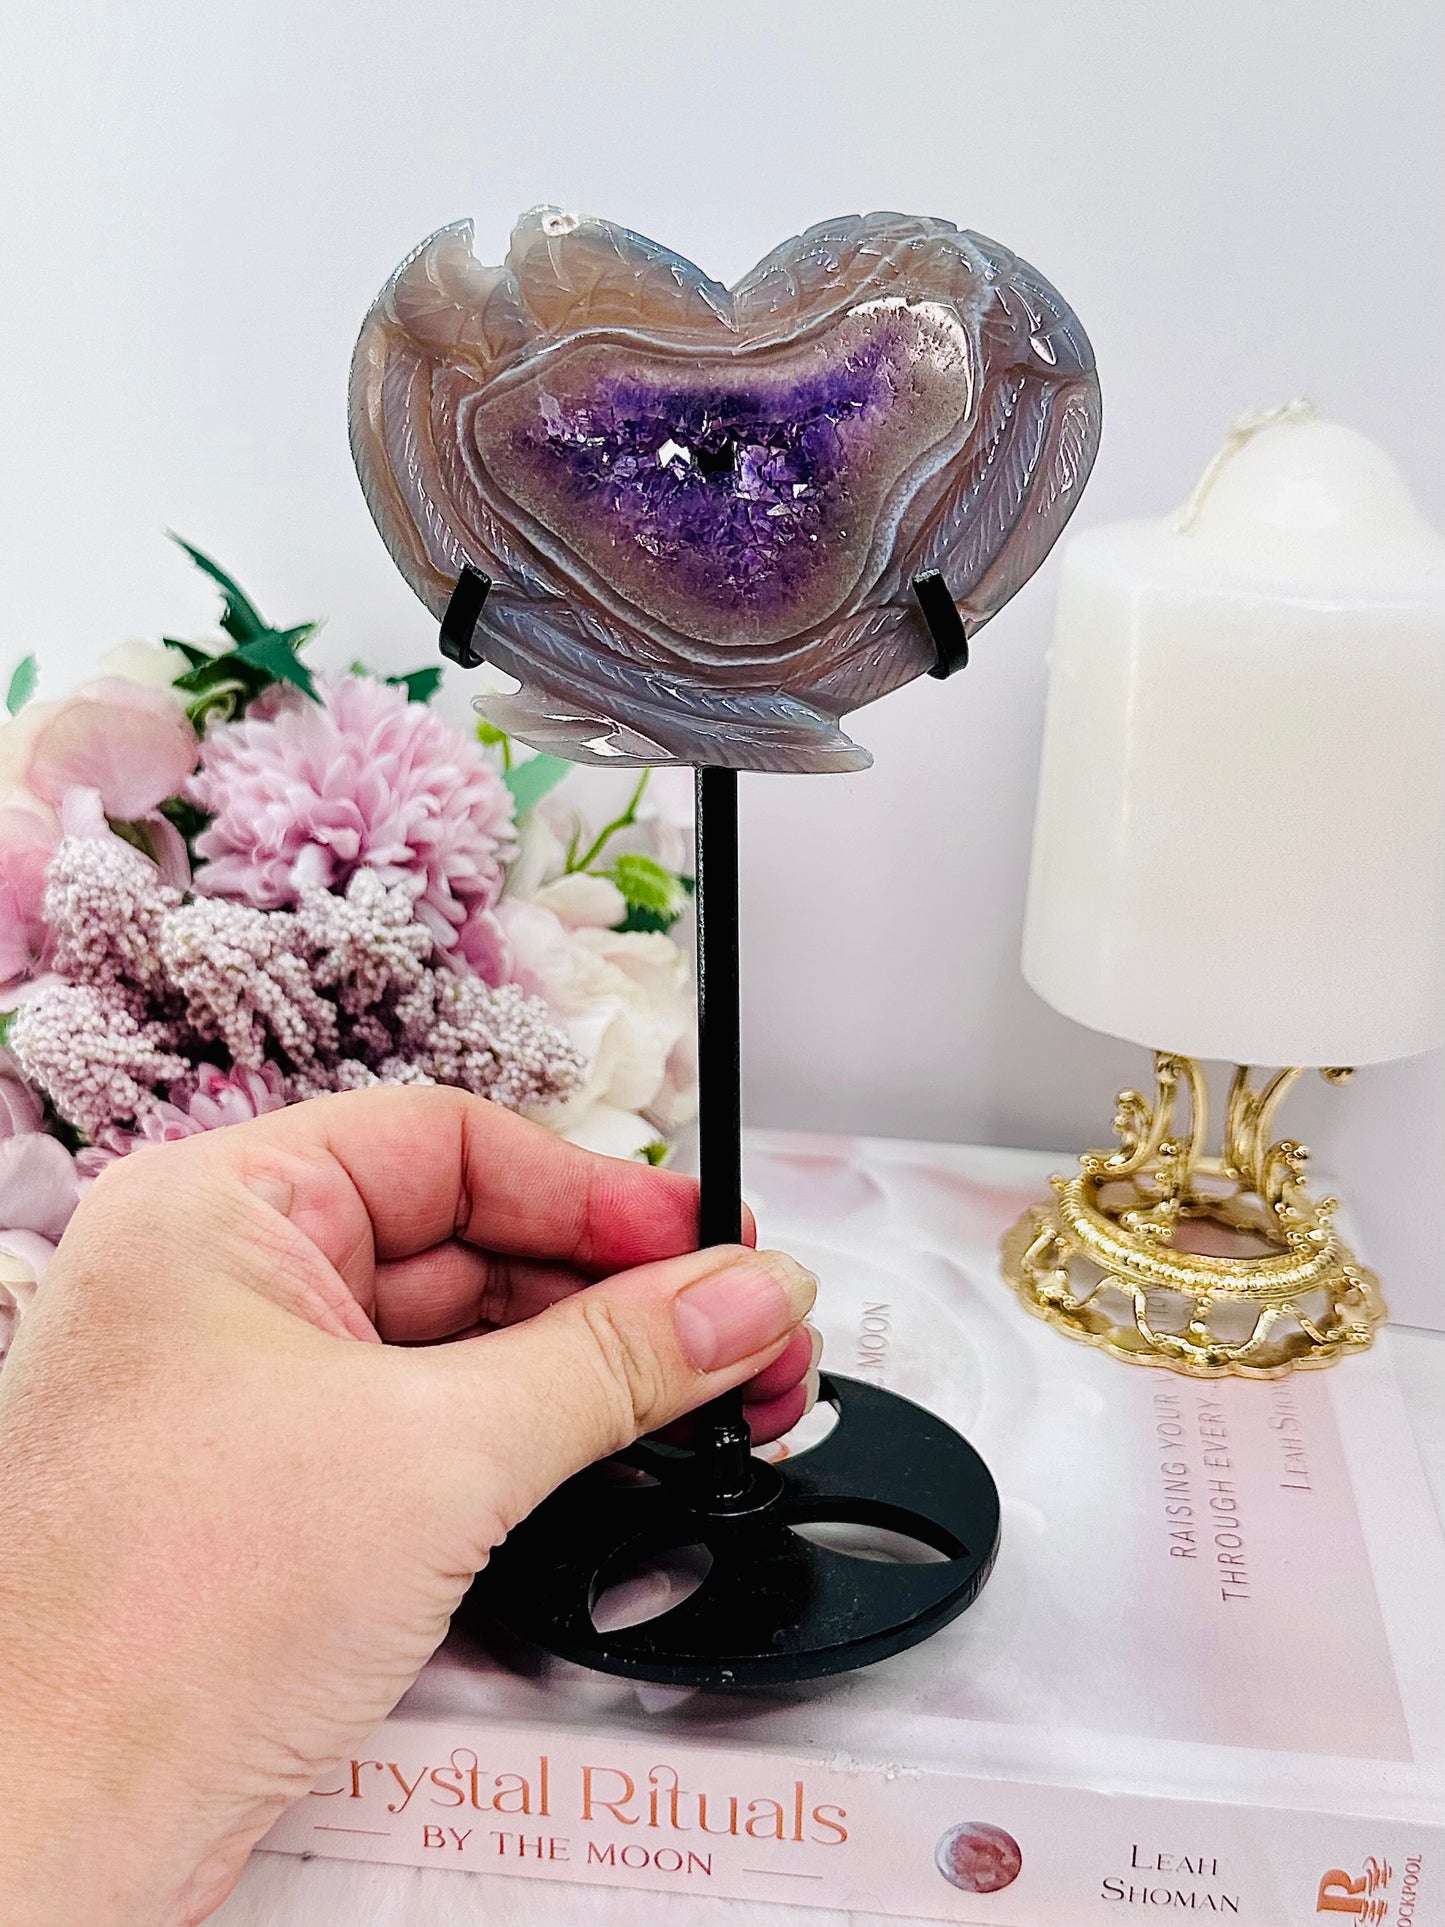 Spectacular Piece ~ Absolutely Stunning 18.5cm Druzy Amethyst Agate Heart on Stand From Argentina